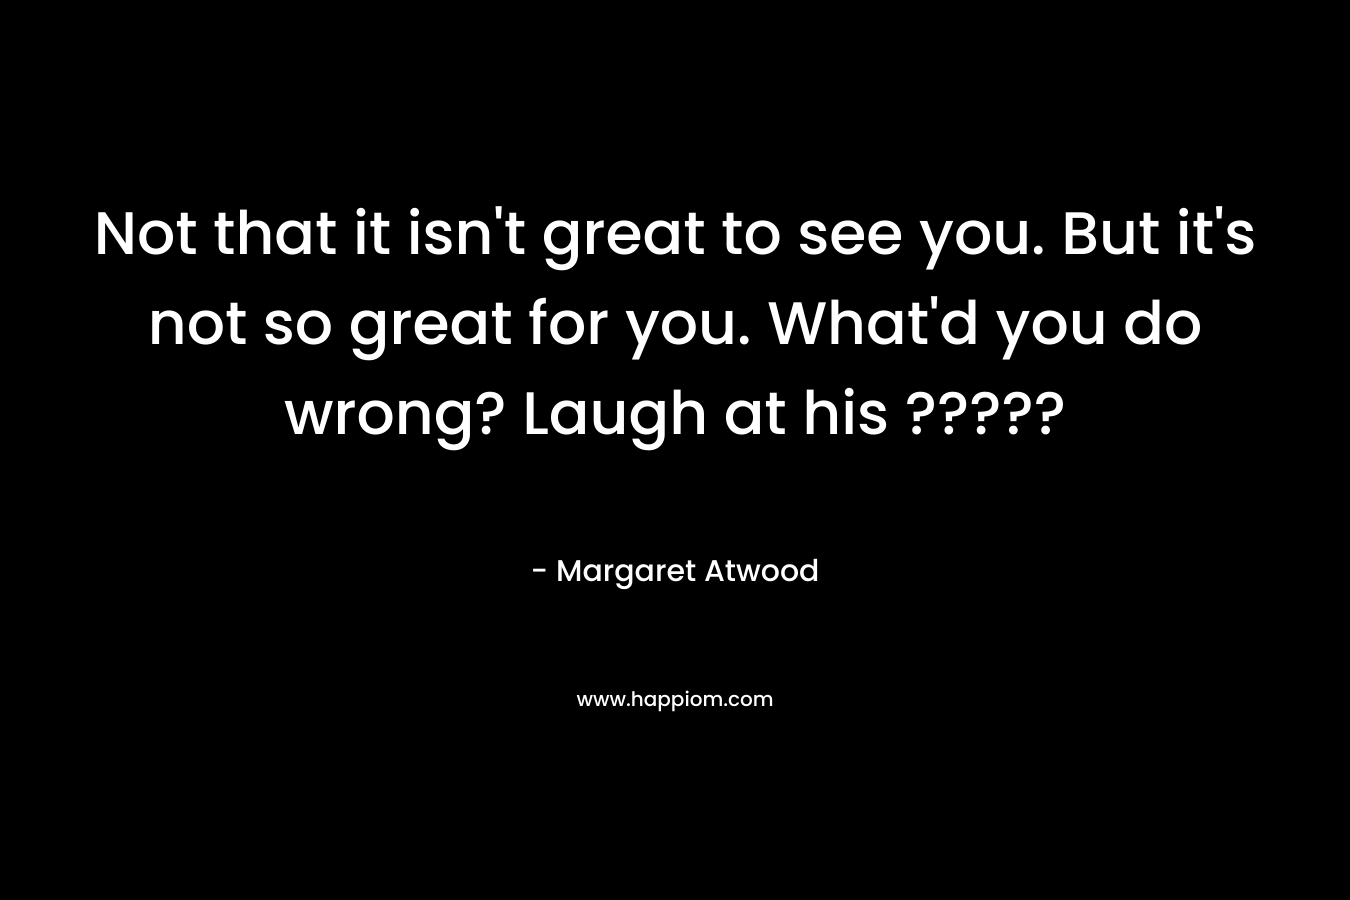 Not that it isn’t great to see you. But it’s not so great for you. What’d you do wrong? Laugh at his ????? – Margaret Atwood